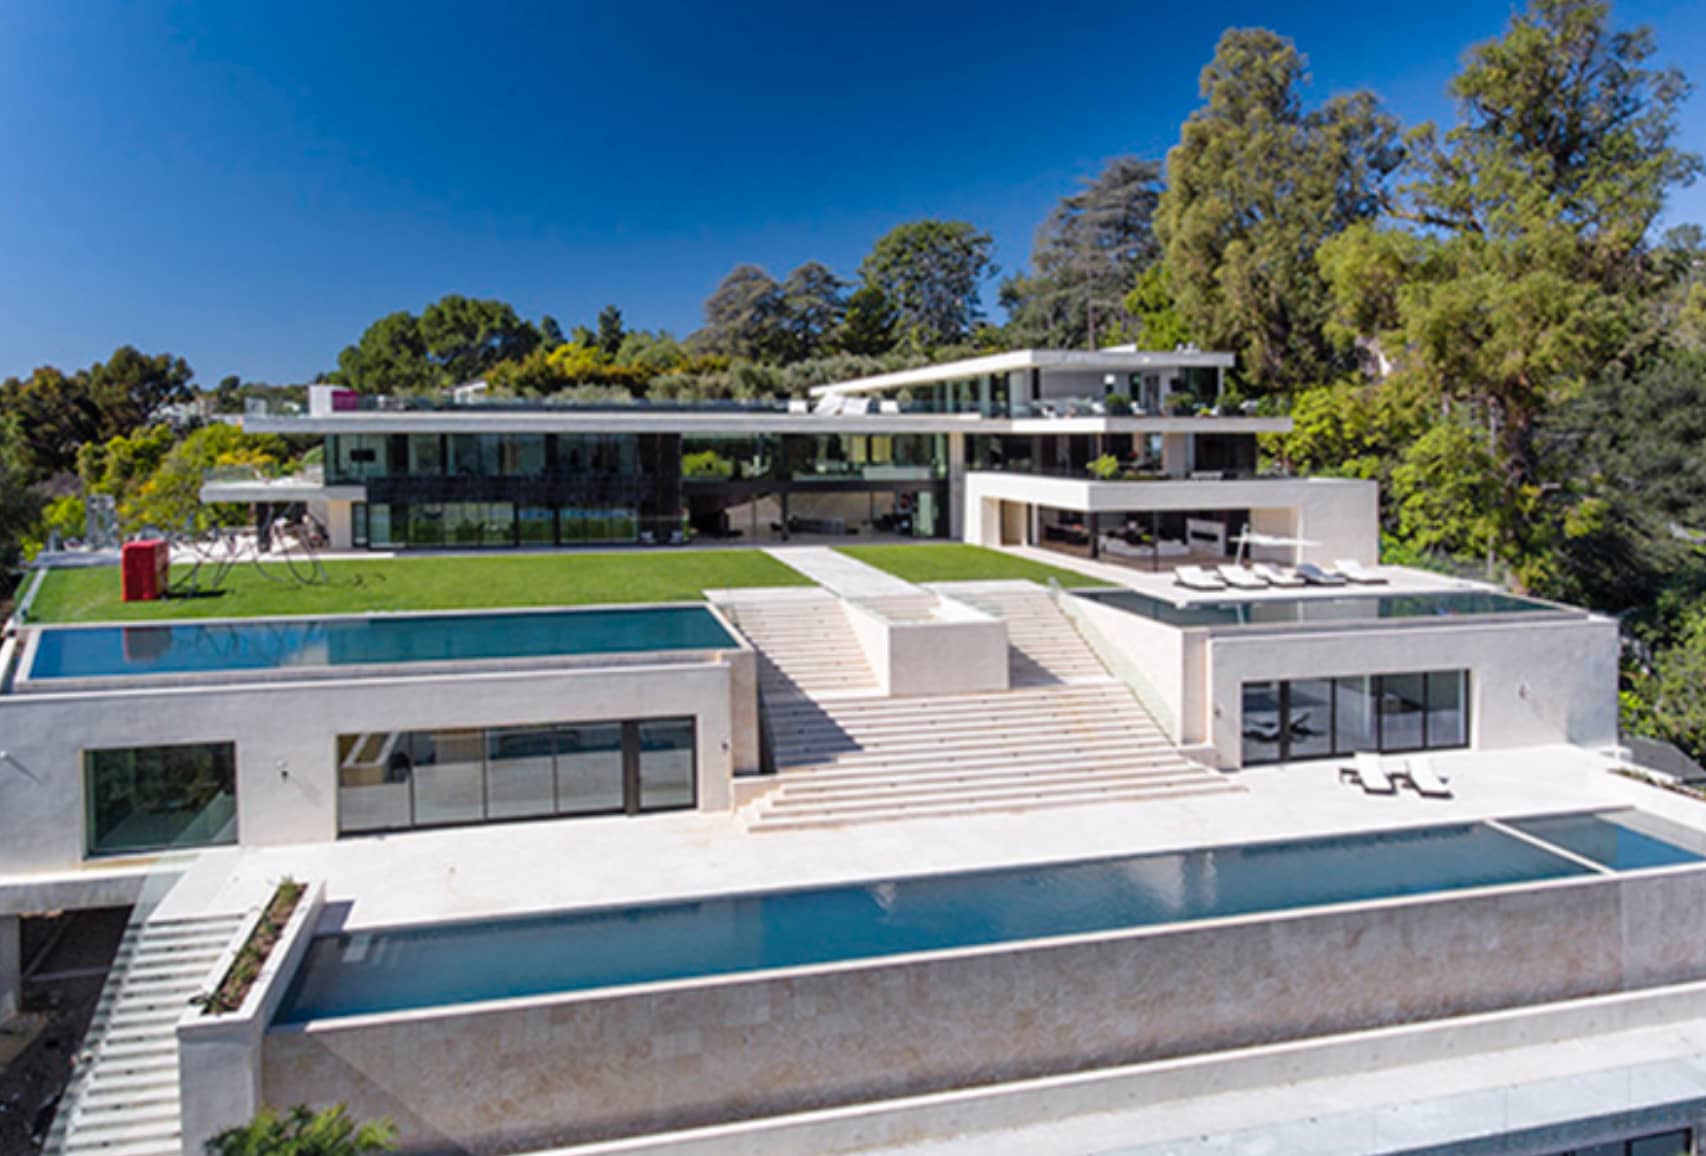 A Look at Jay Z and Beyoncé's New $90 Million Bel-Air Mansion - Core77